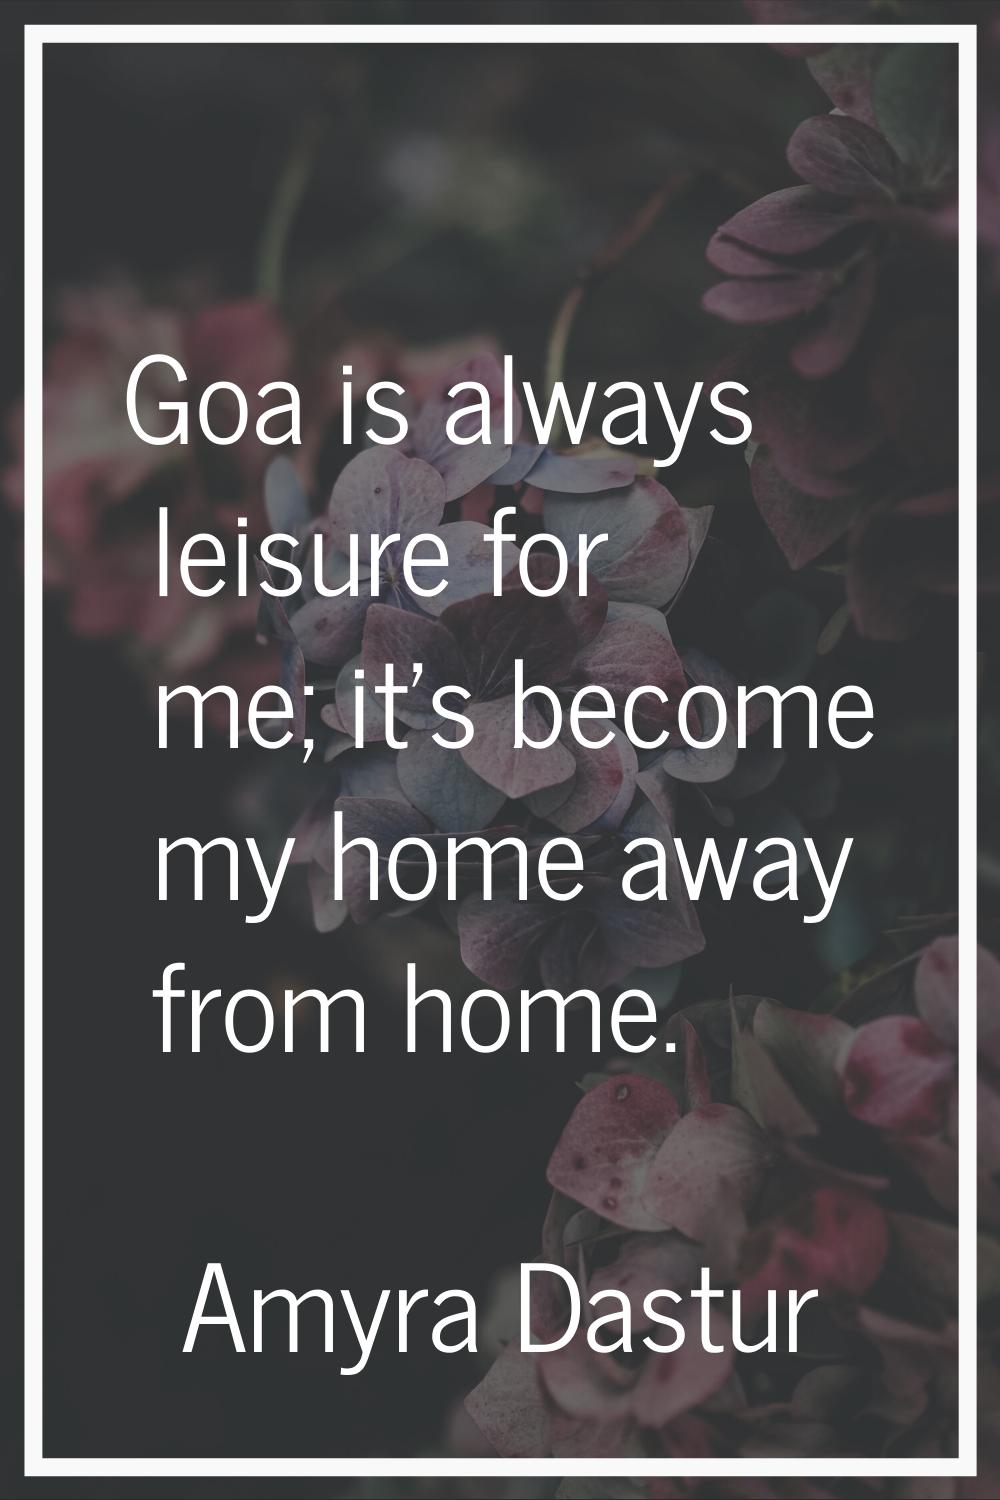 Goa is always leisure for me; it's become my home away from home.